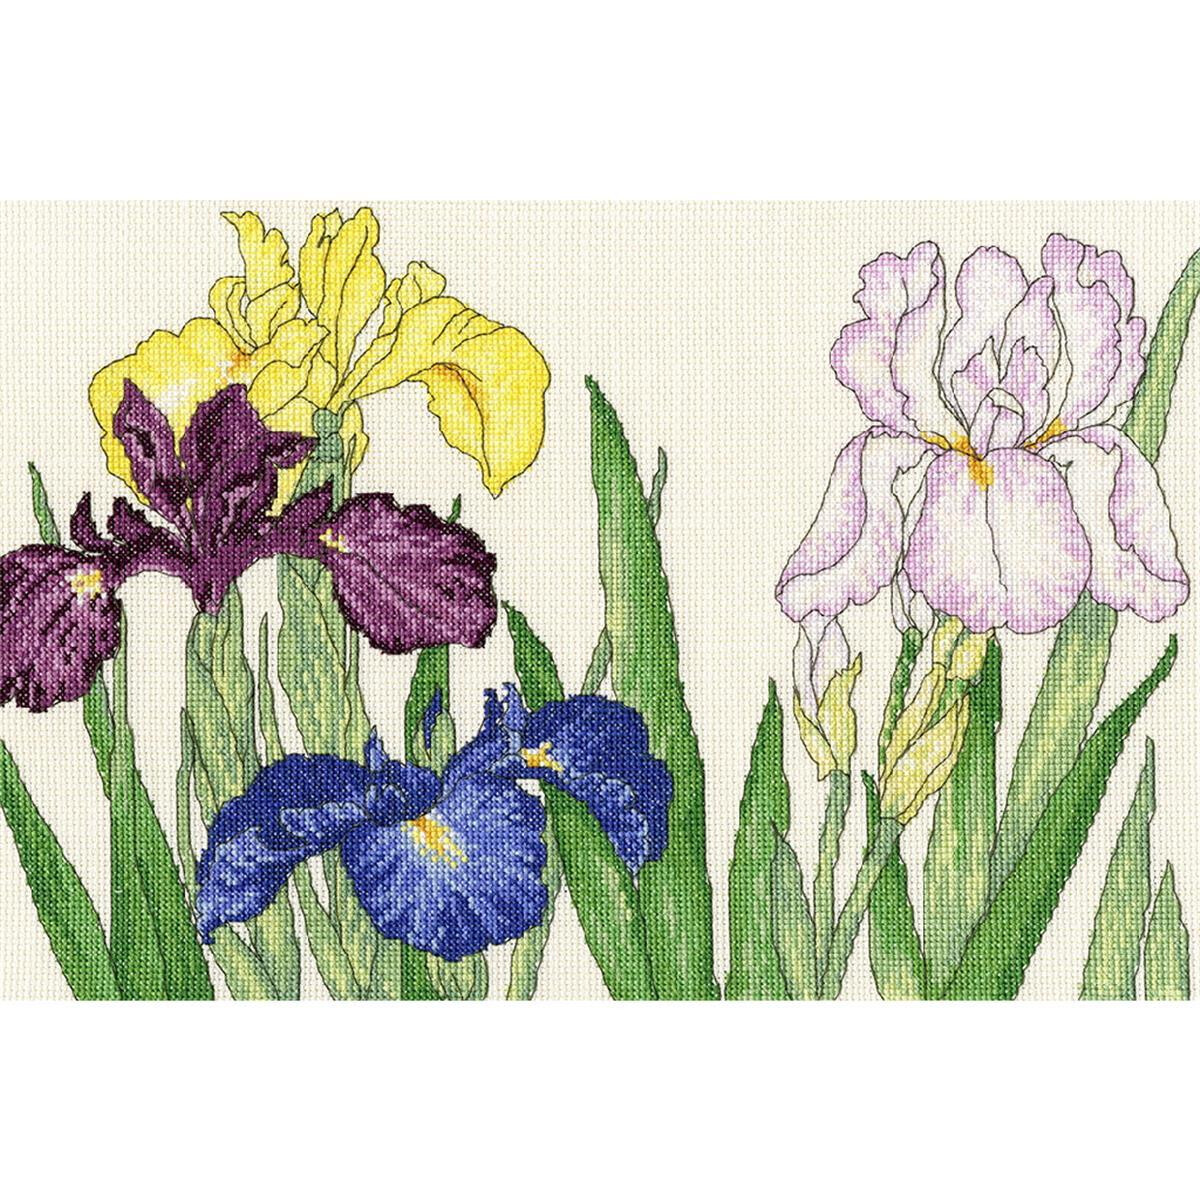 A colorful embroidery pack with different iris flowers...